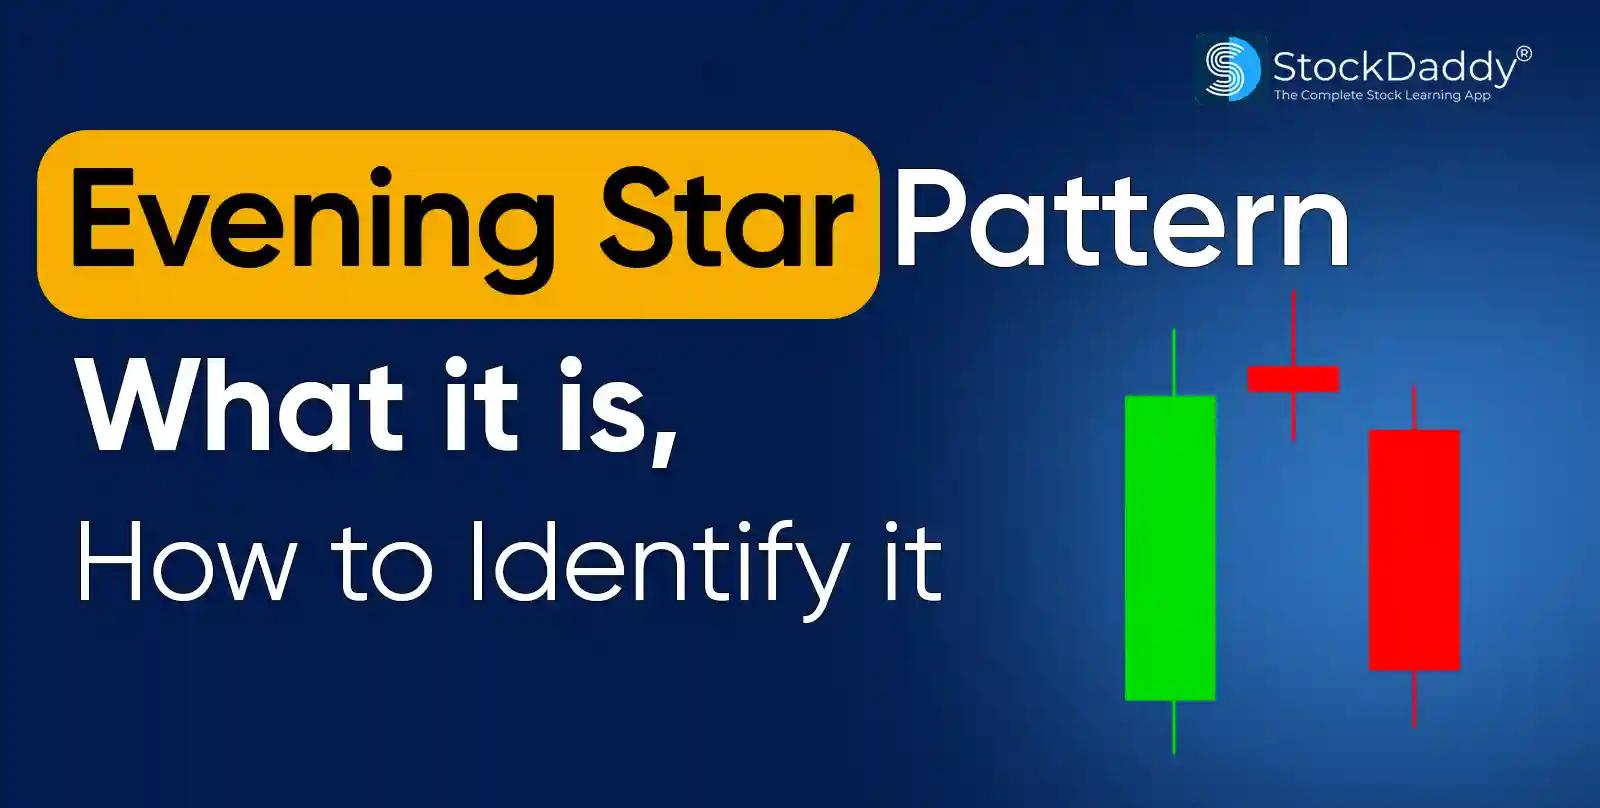 Evening Star Pattern: What it is, How to Identify it